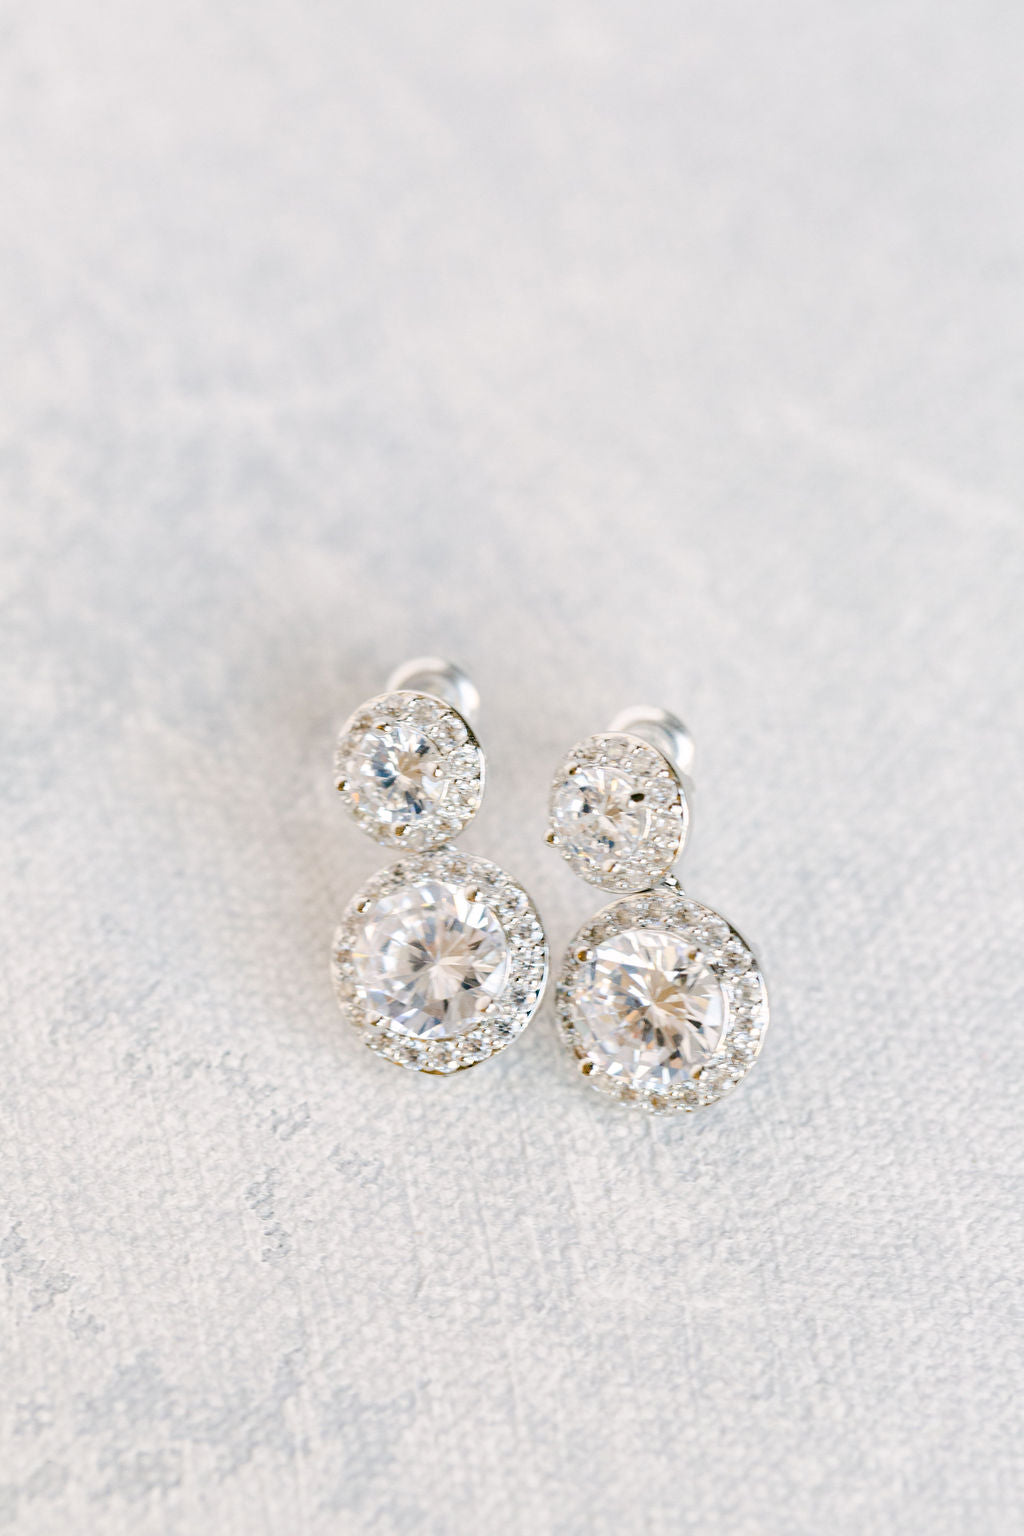 Shimmer and Shine Earrings (Silver)